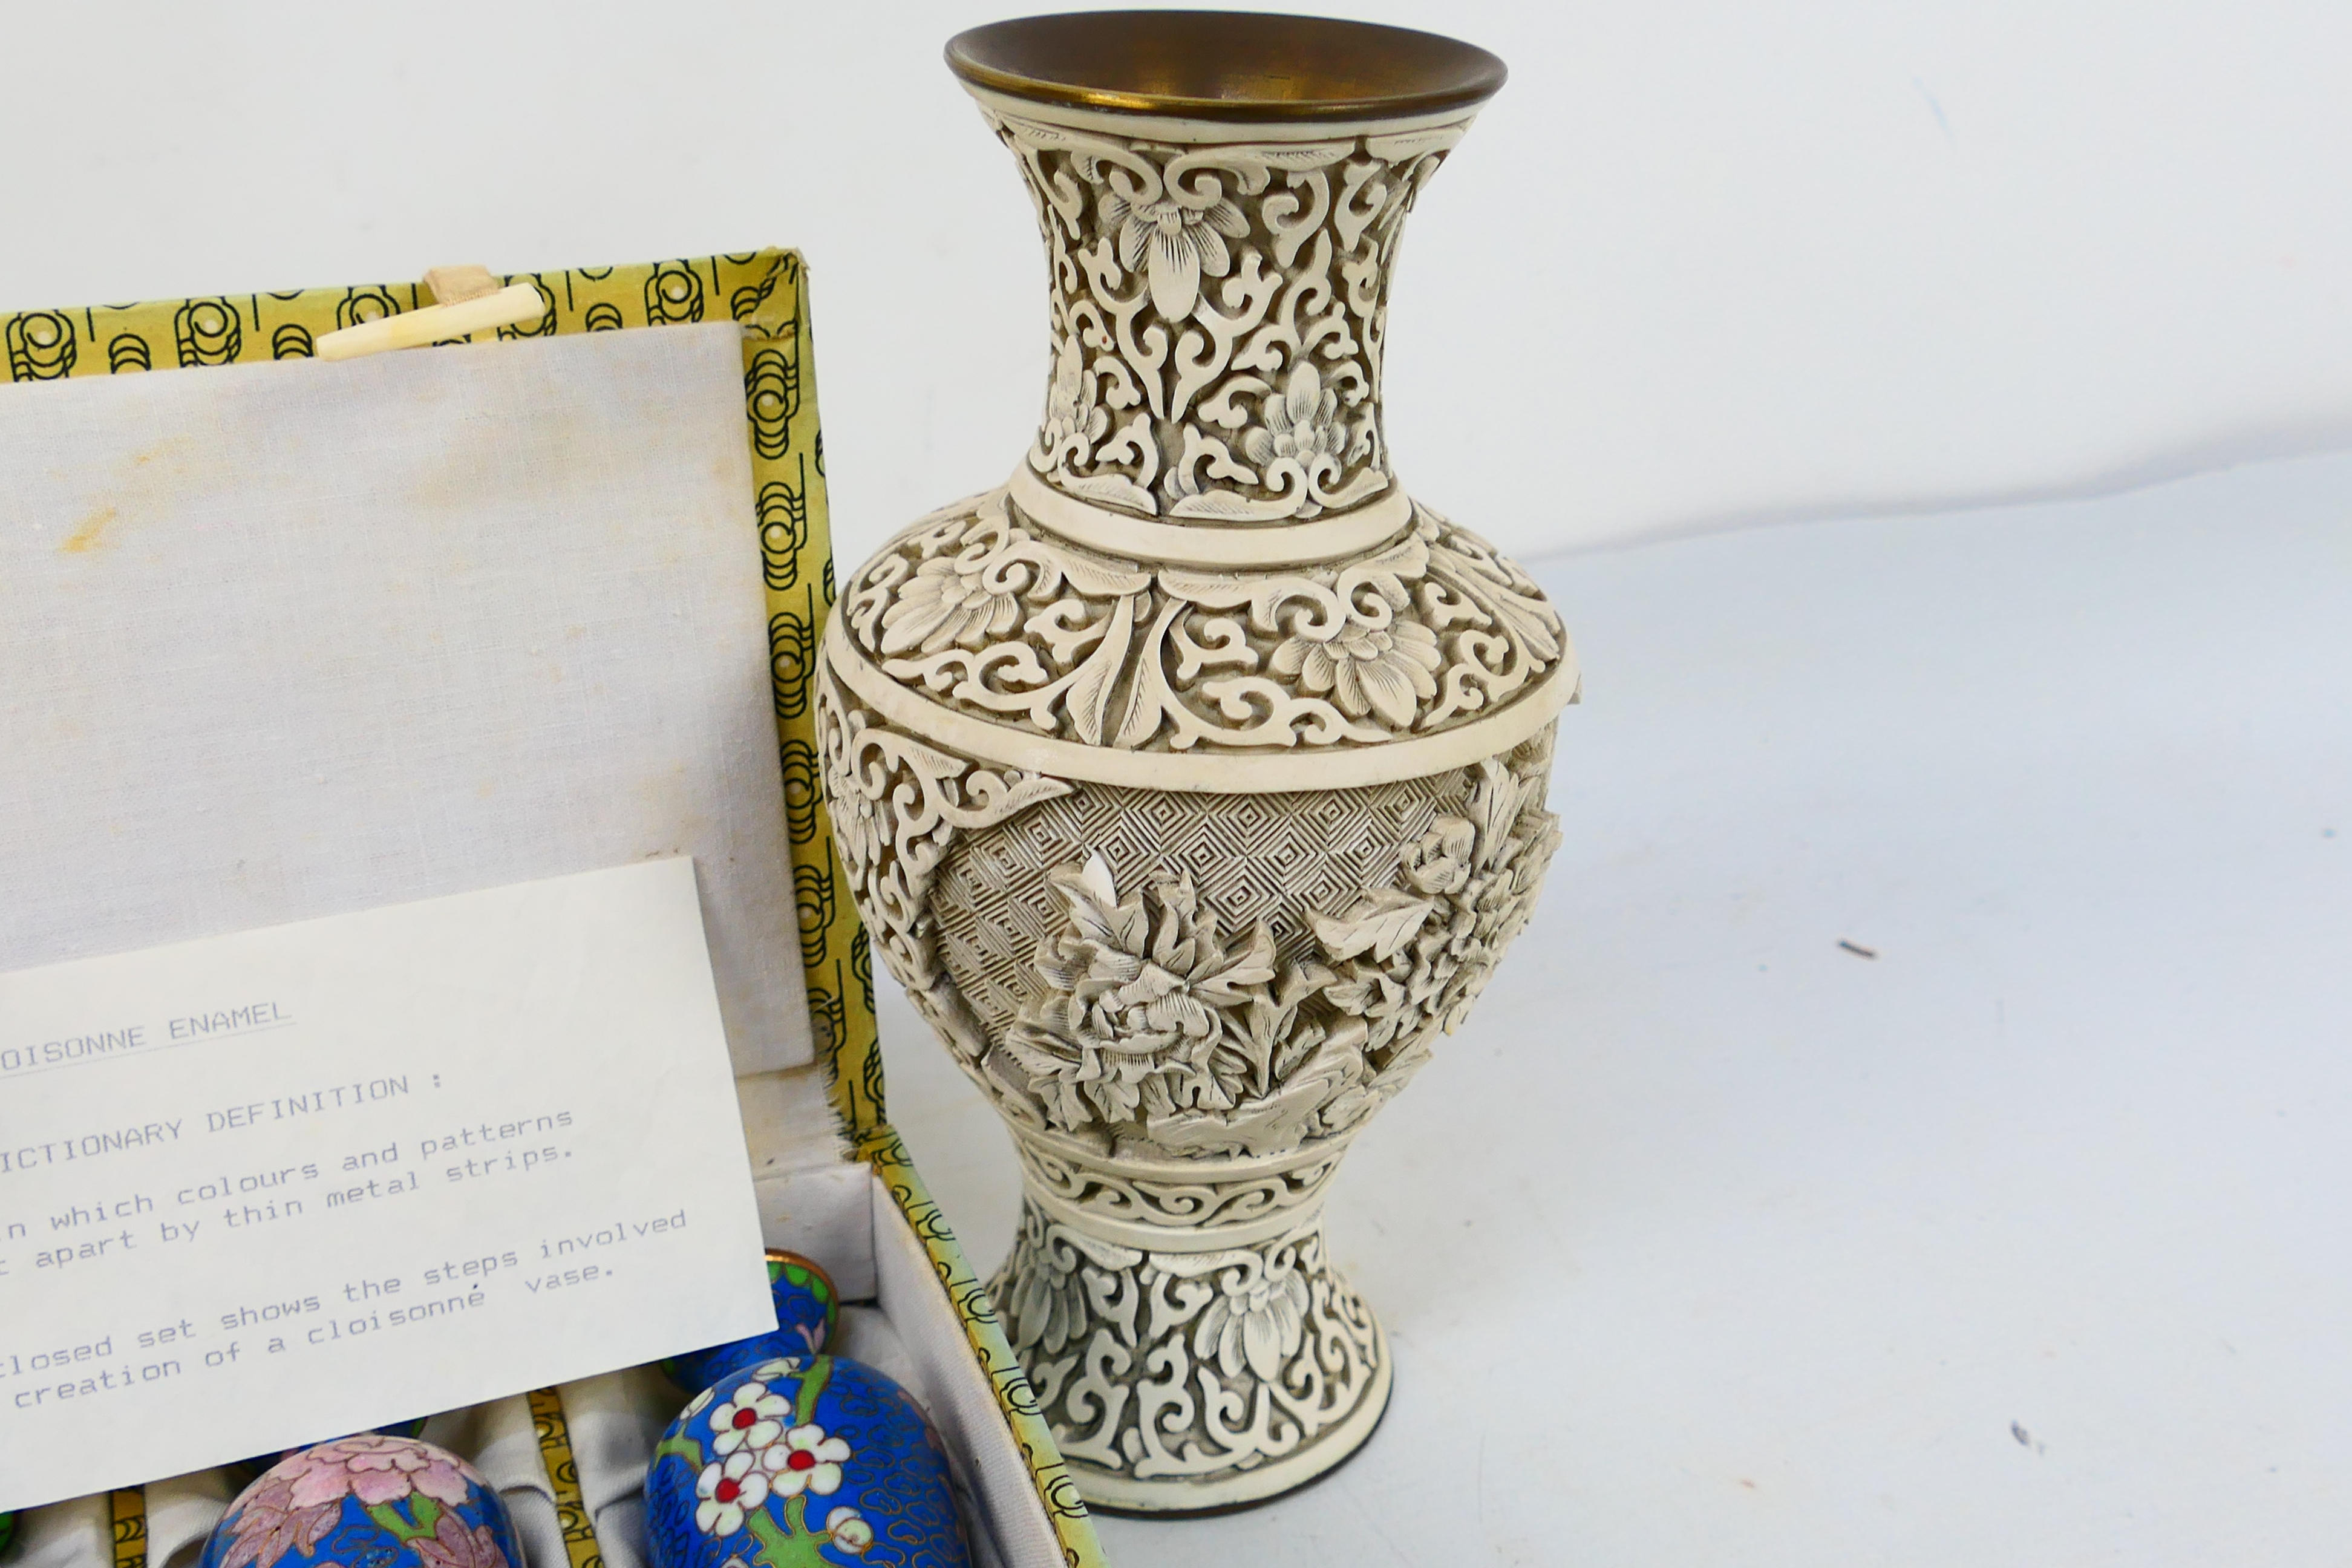 Lot to include two small cloisonne vases and stand, - Image 5 of 11